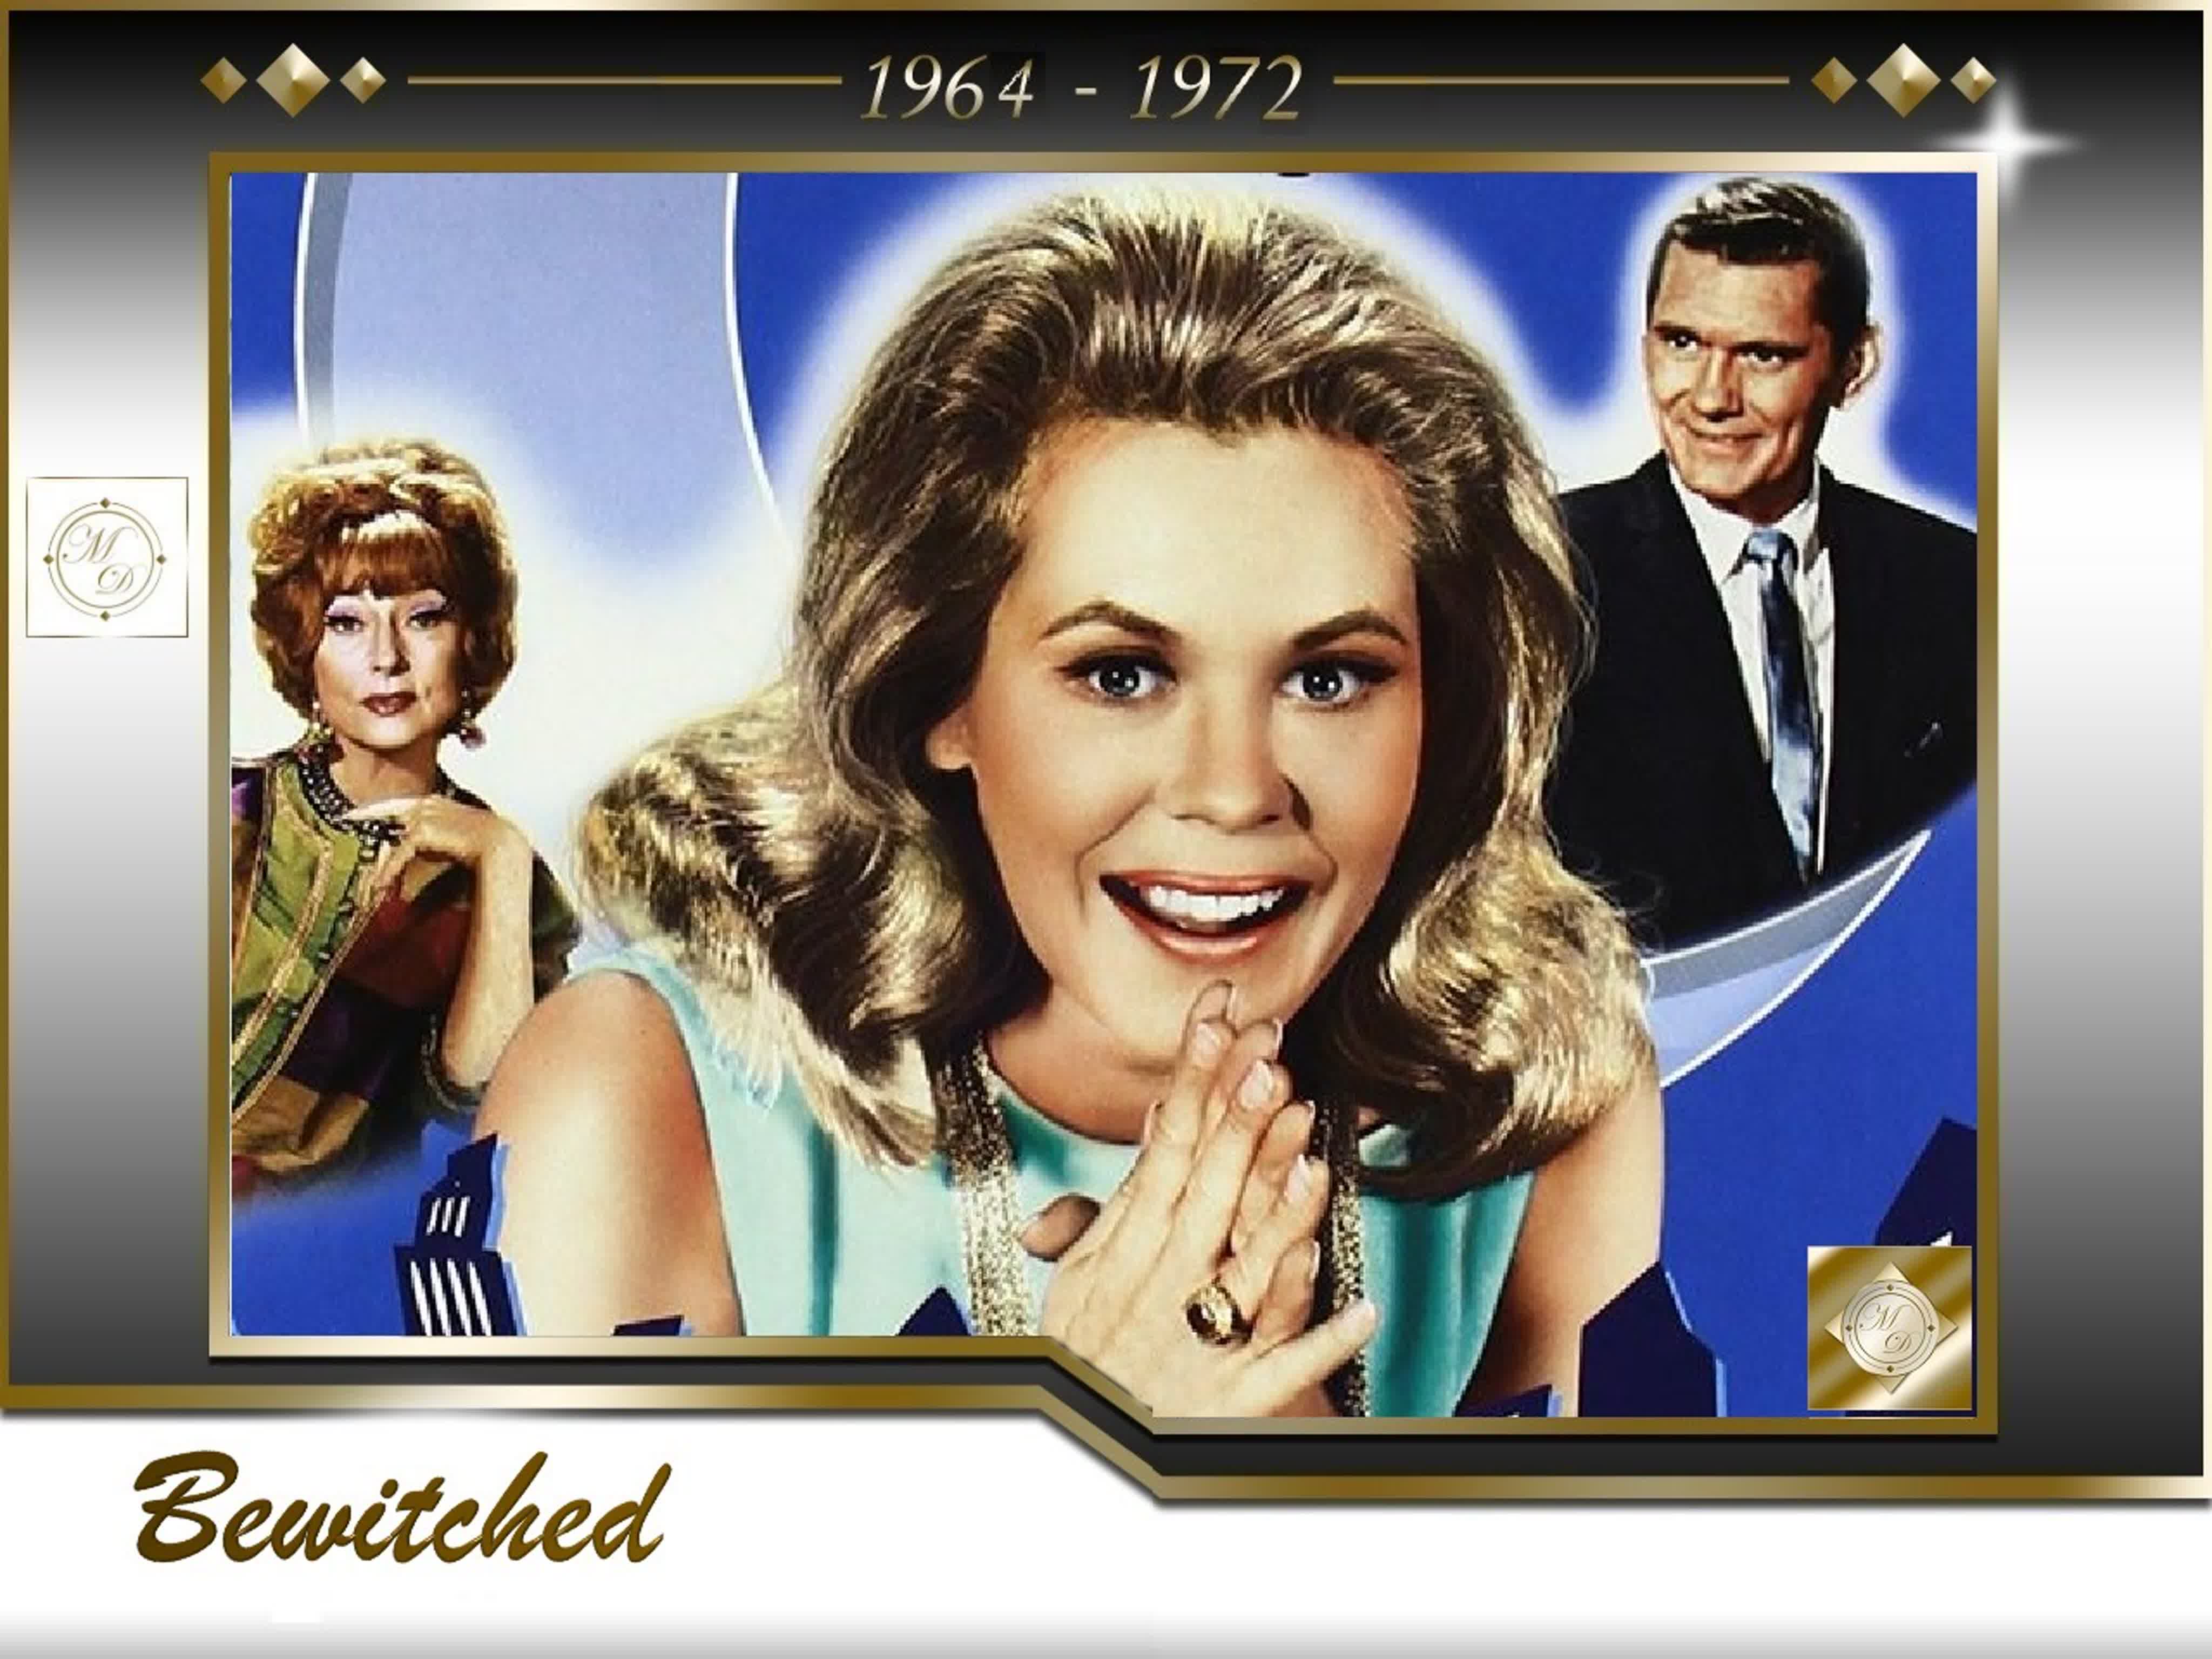 Bewitched  (ABC 1964-1972)